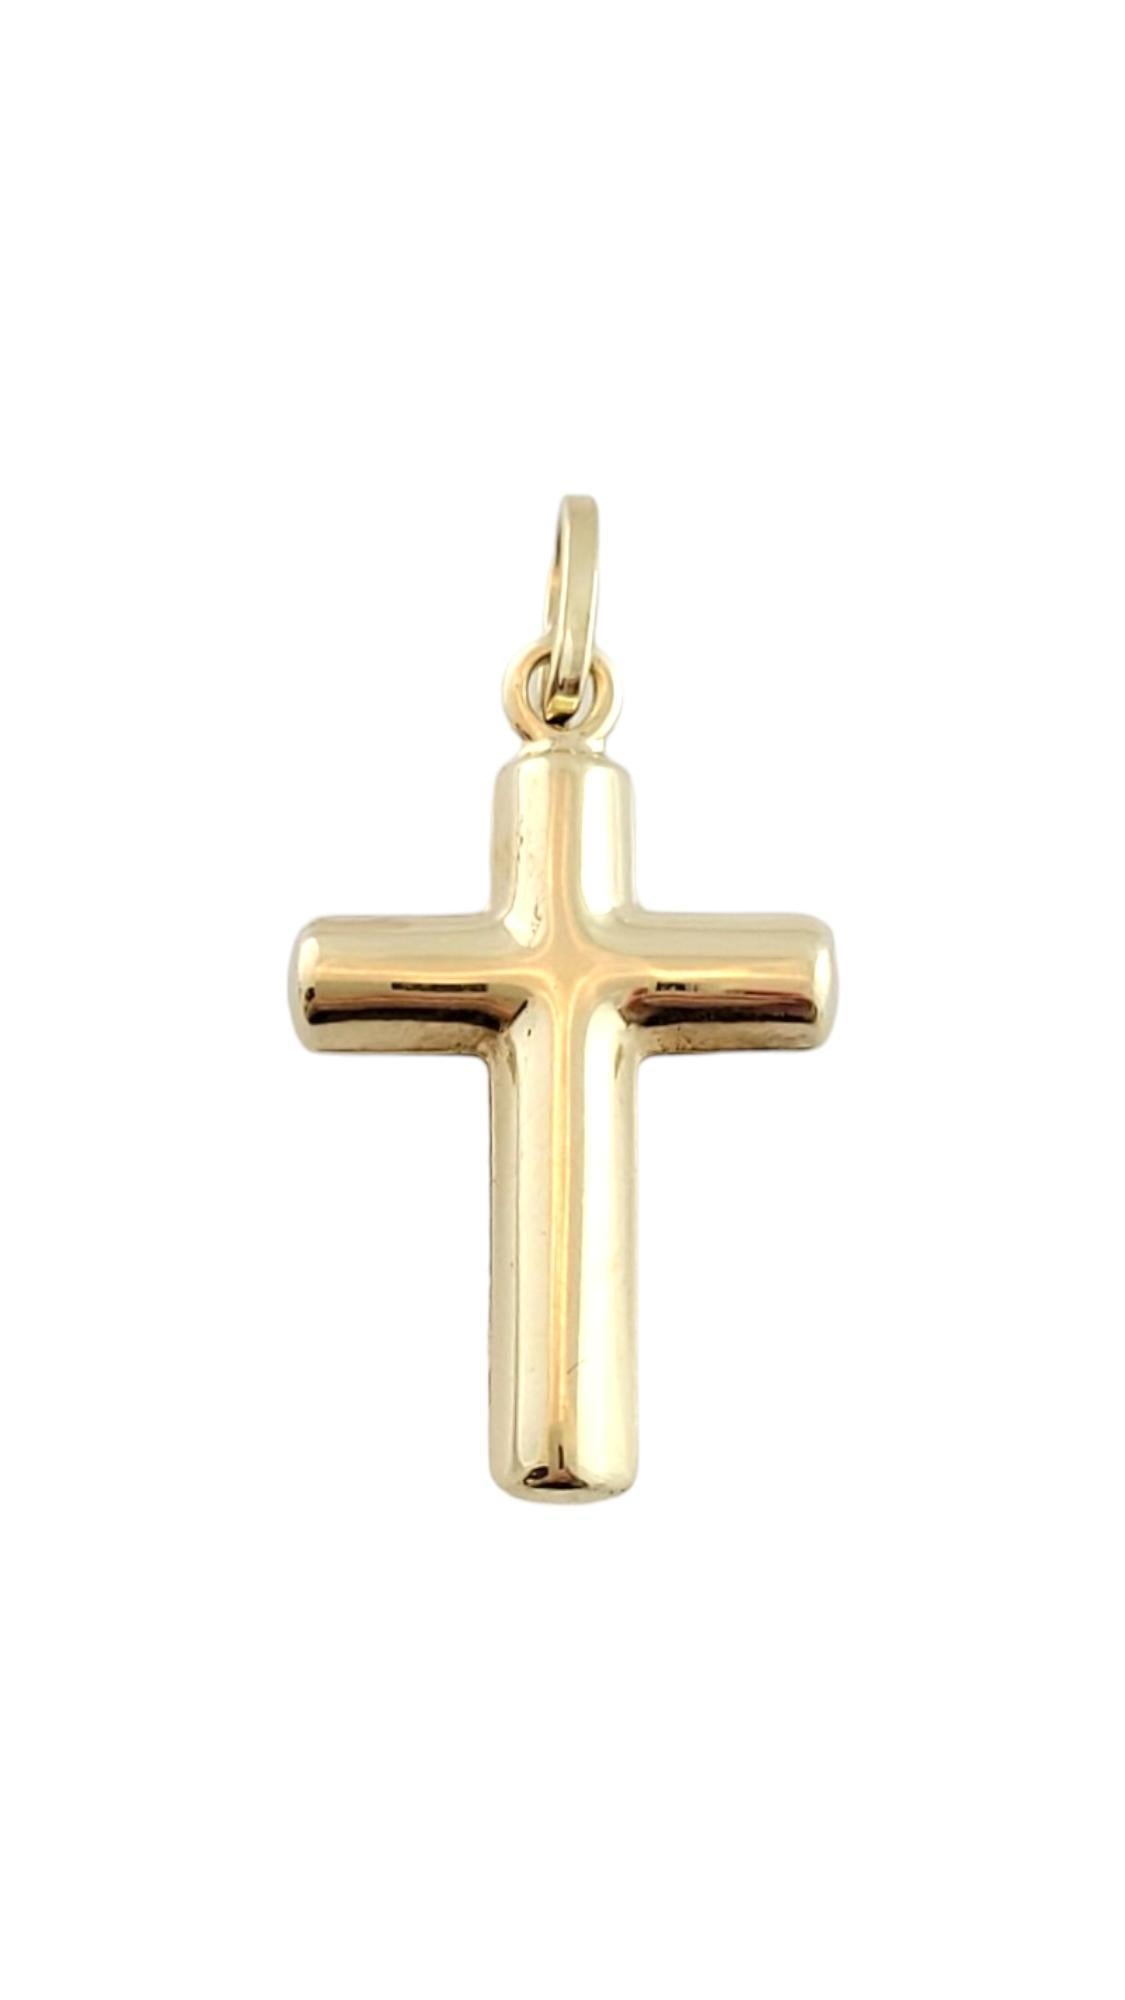 Vintage 14K Yellow Gold Crucifix Charm

Crucifix charm in 14 karat yellow gold.

Hallmark: 14K Italy

Weight: 1.6 g/ 1 dwt.

Overall Dimensions: 25.27 mm X 15.3 mm

Very good condition, professionally polished.

Will come packaged in a gift box or